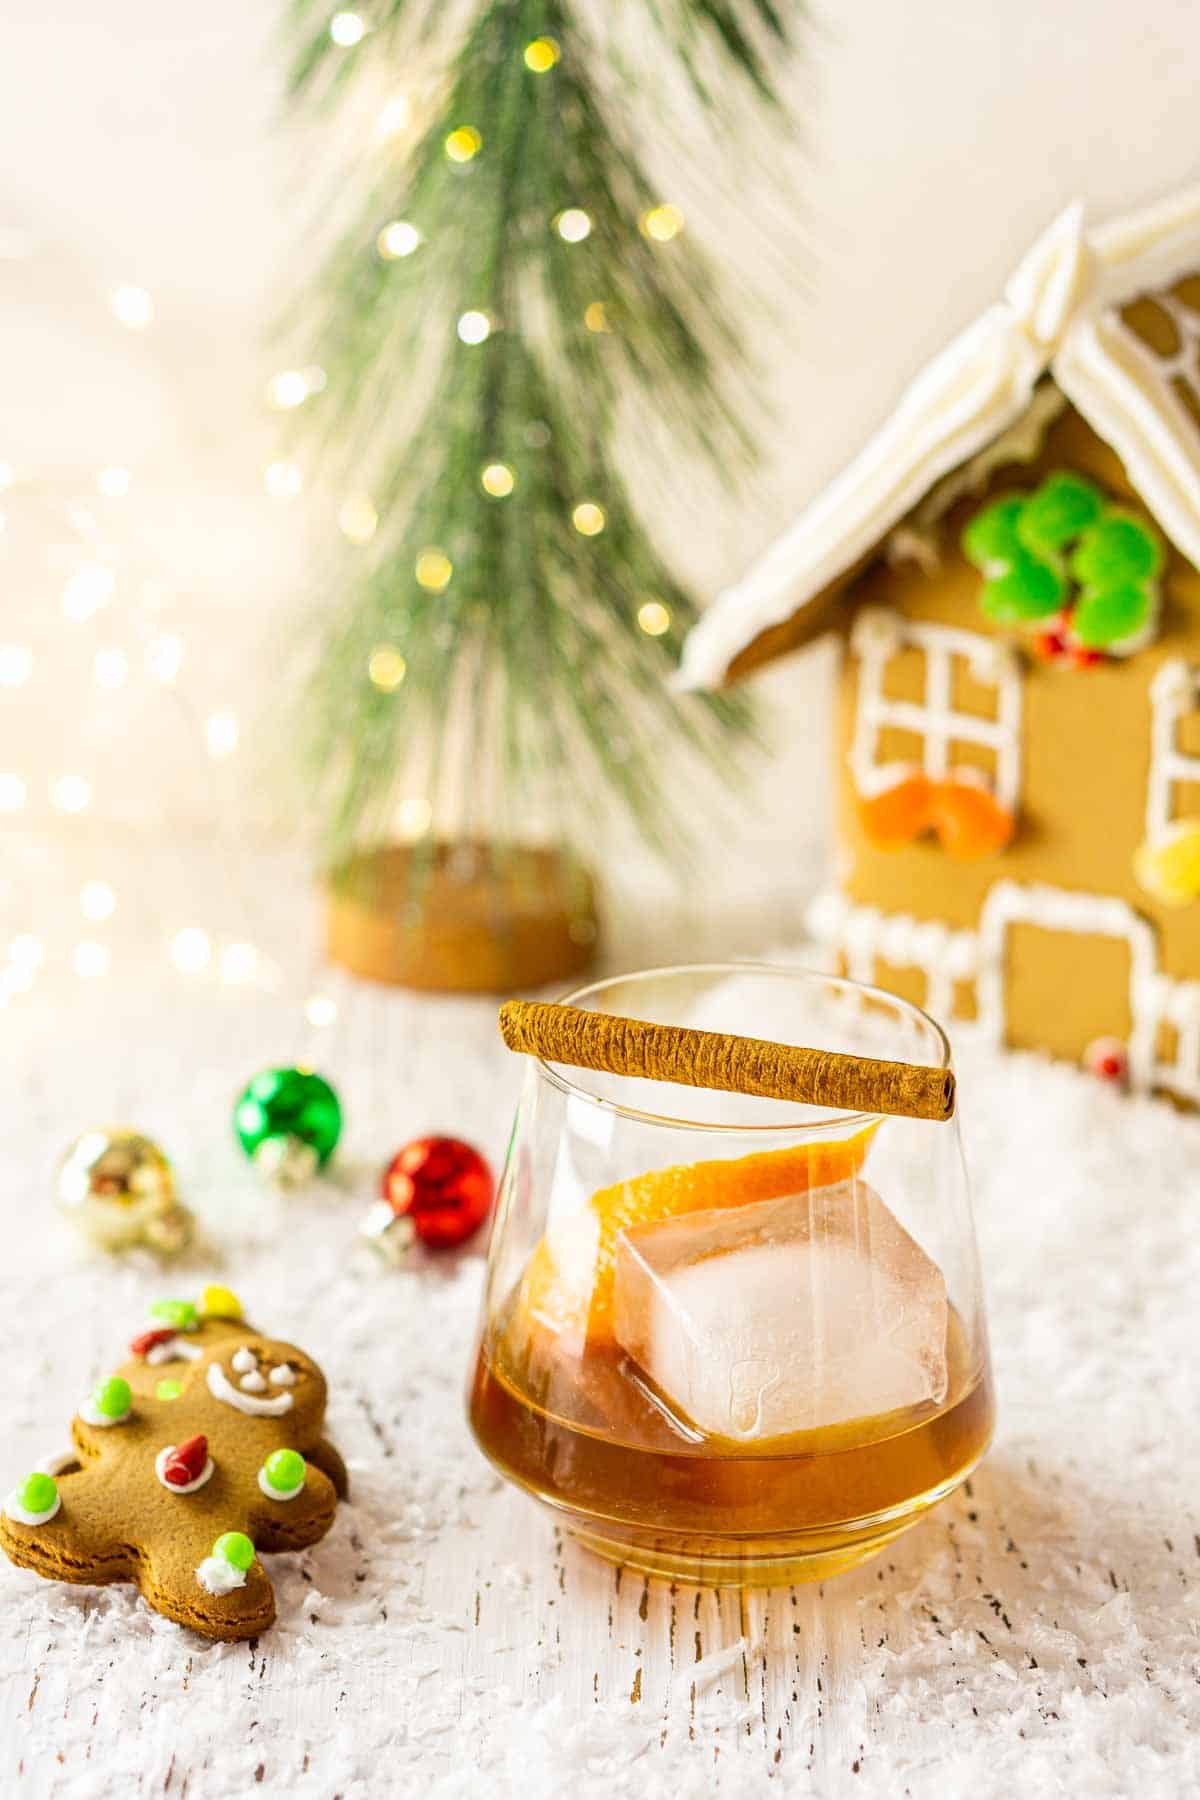 A gingerbread old fashioned with cookies and decor next to it.